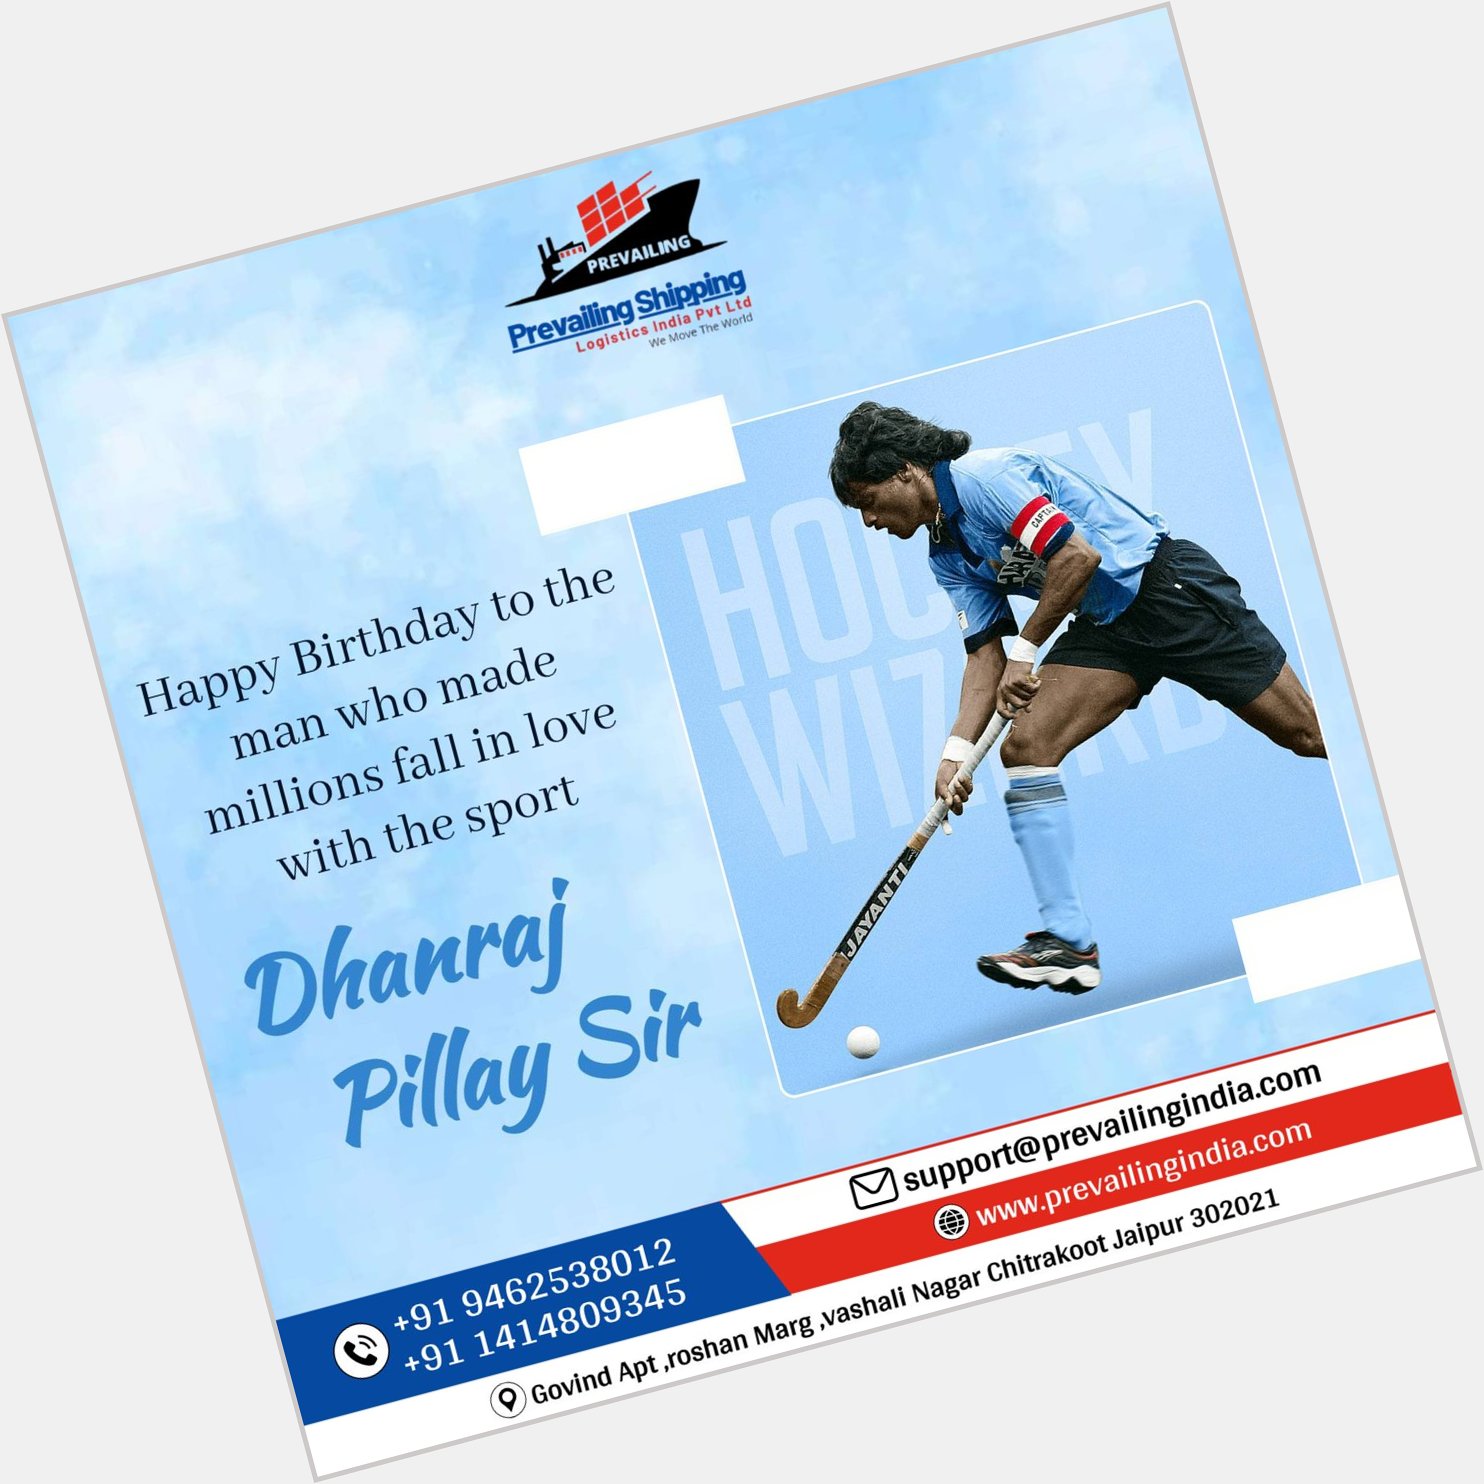 Happy Birthday to the man who made millions fall in love with the sport

Dhanraj pillay Sir 